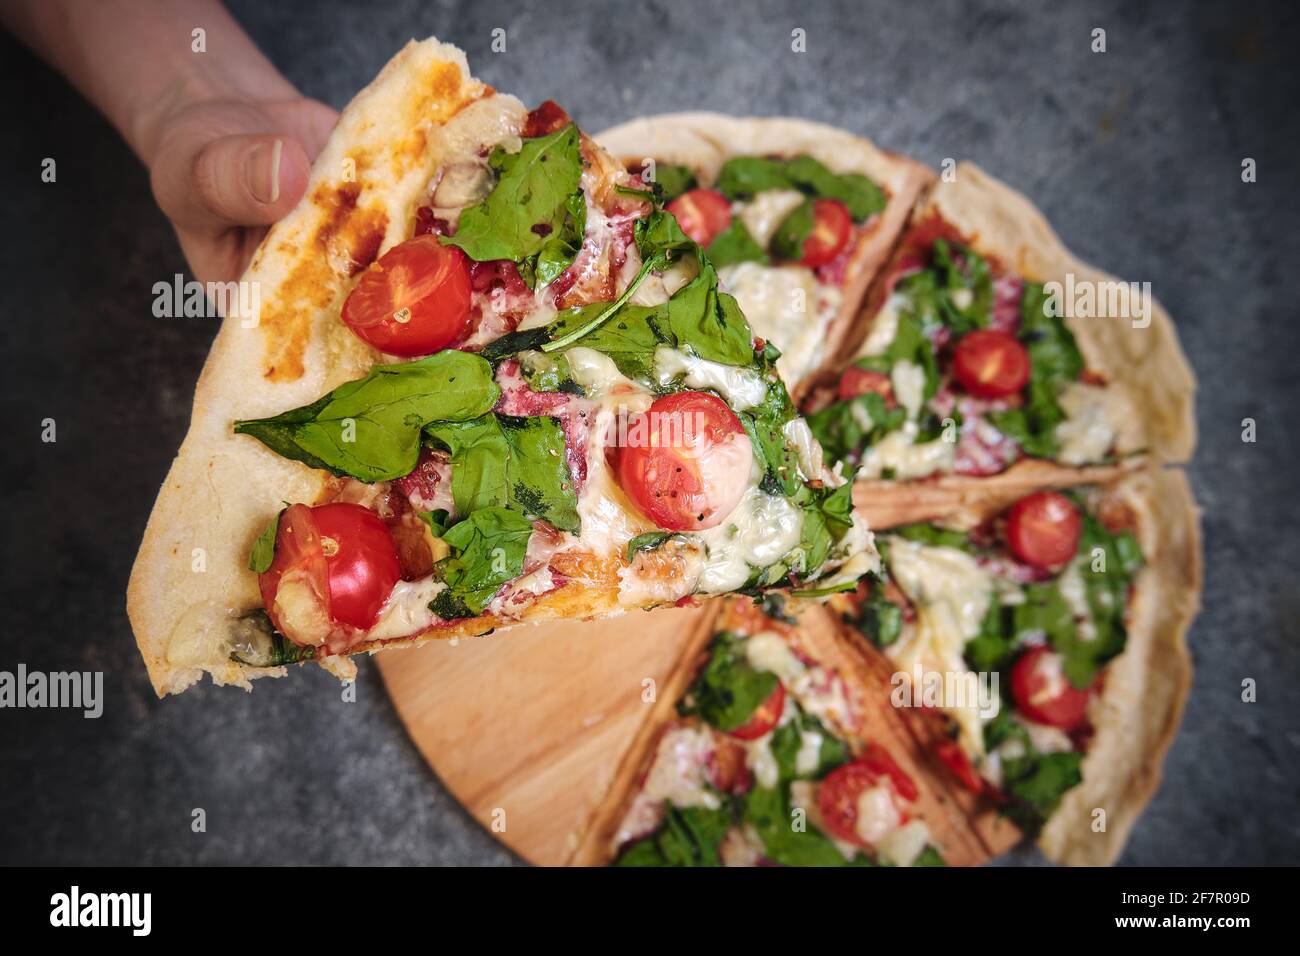 Pizza with cheese, tomatoes, spinach and smoked sausage Stock Photo